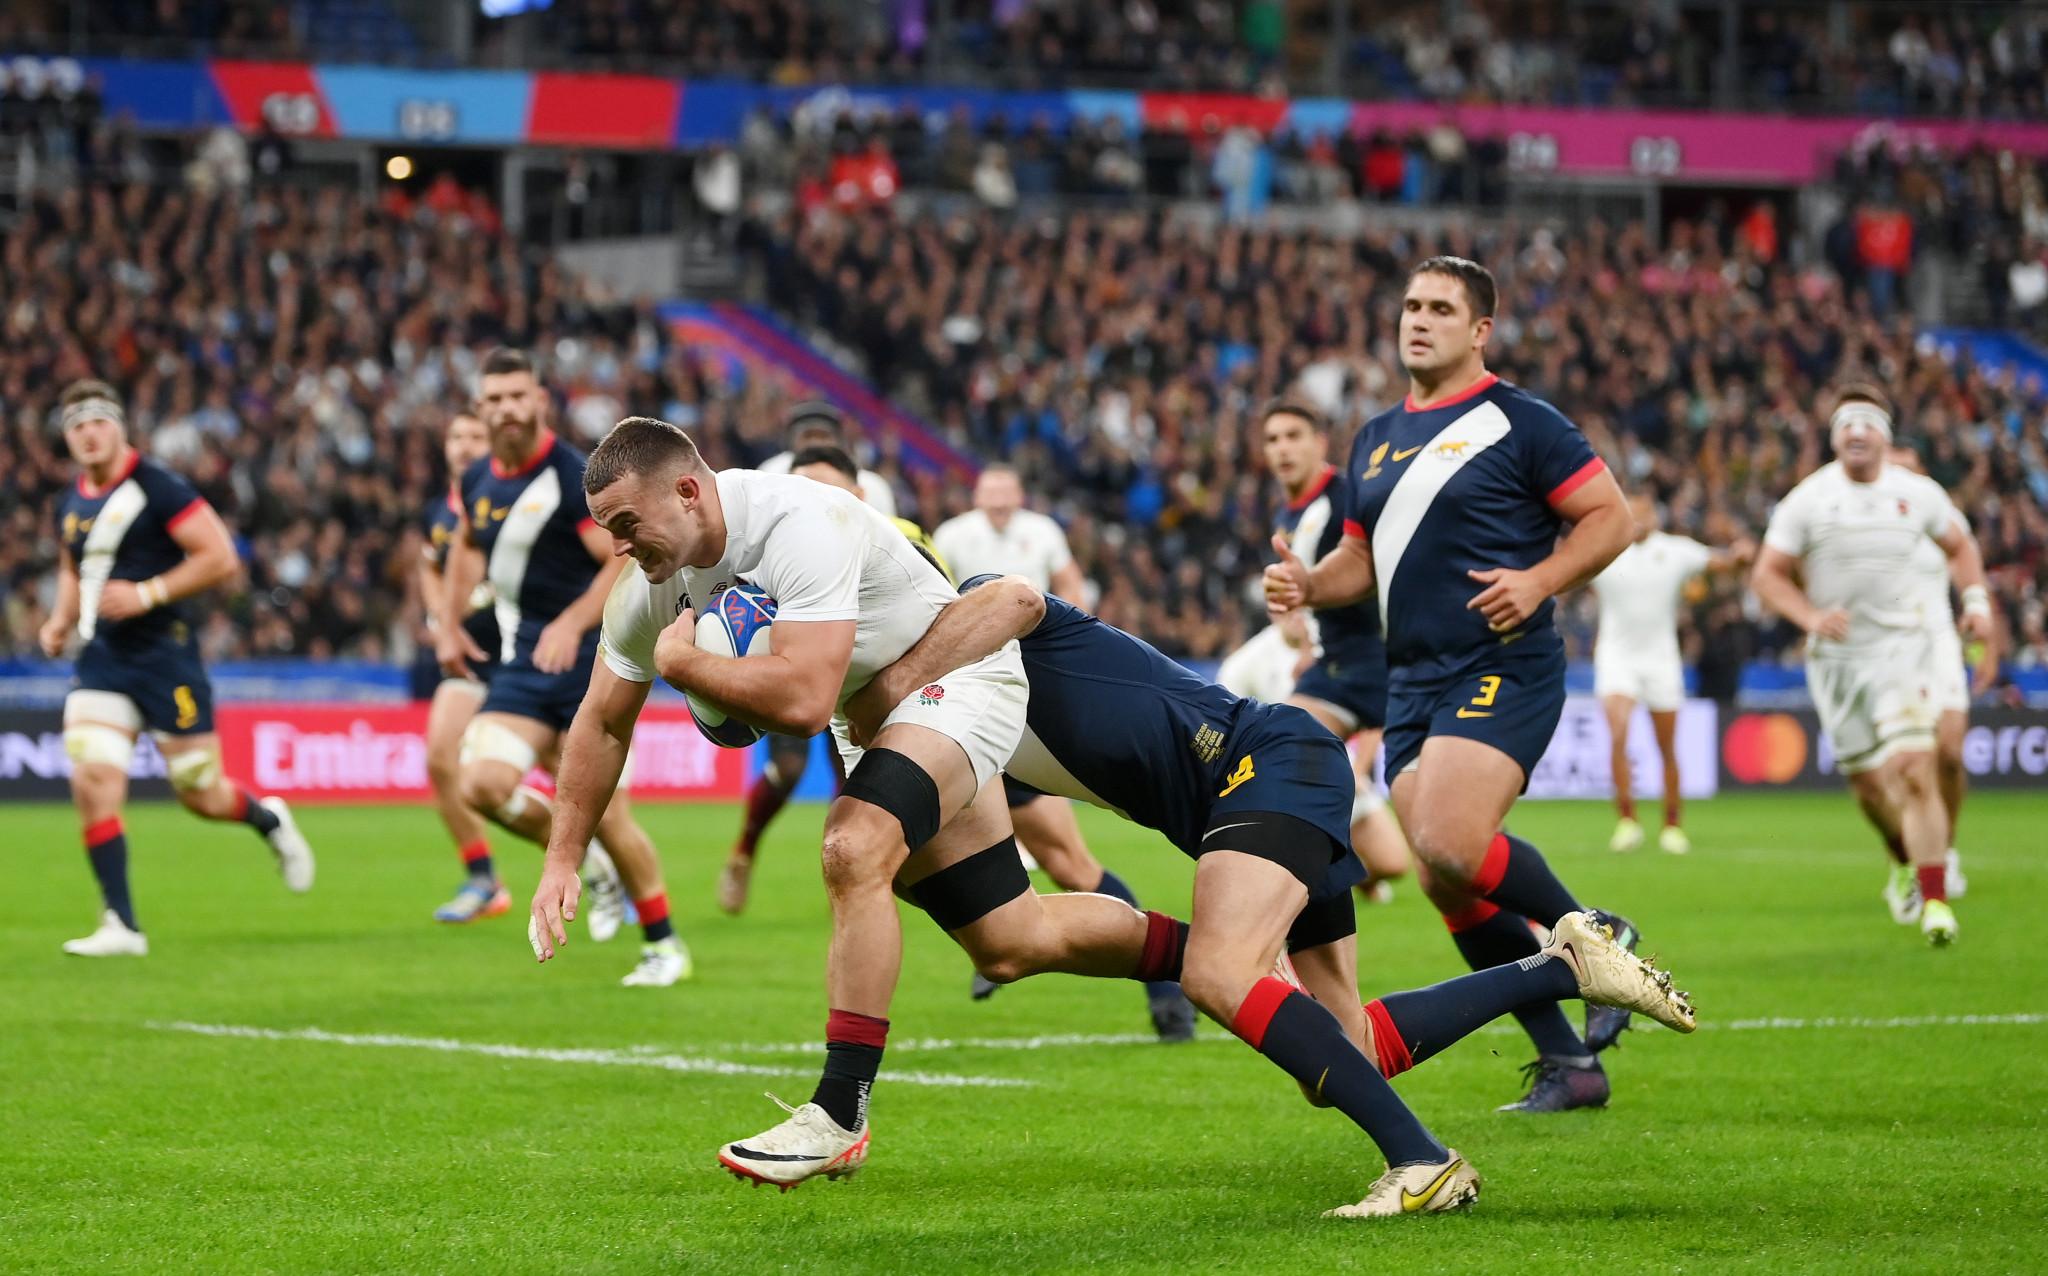 Ben Earl scored the first try of the game as England got off to a blistering start, scoring 13 points in as many minutes ©Getty Images